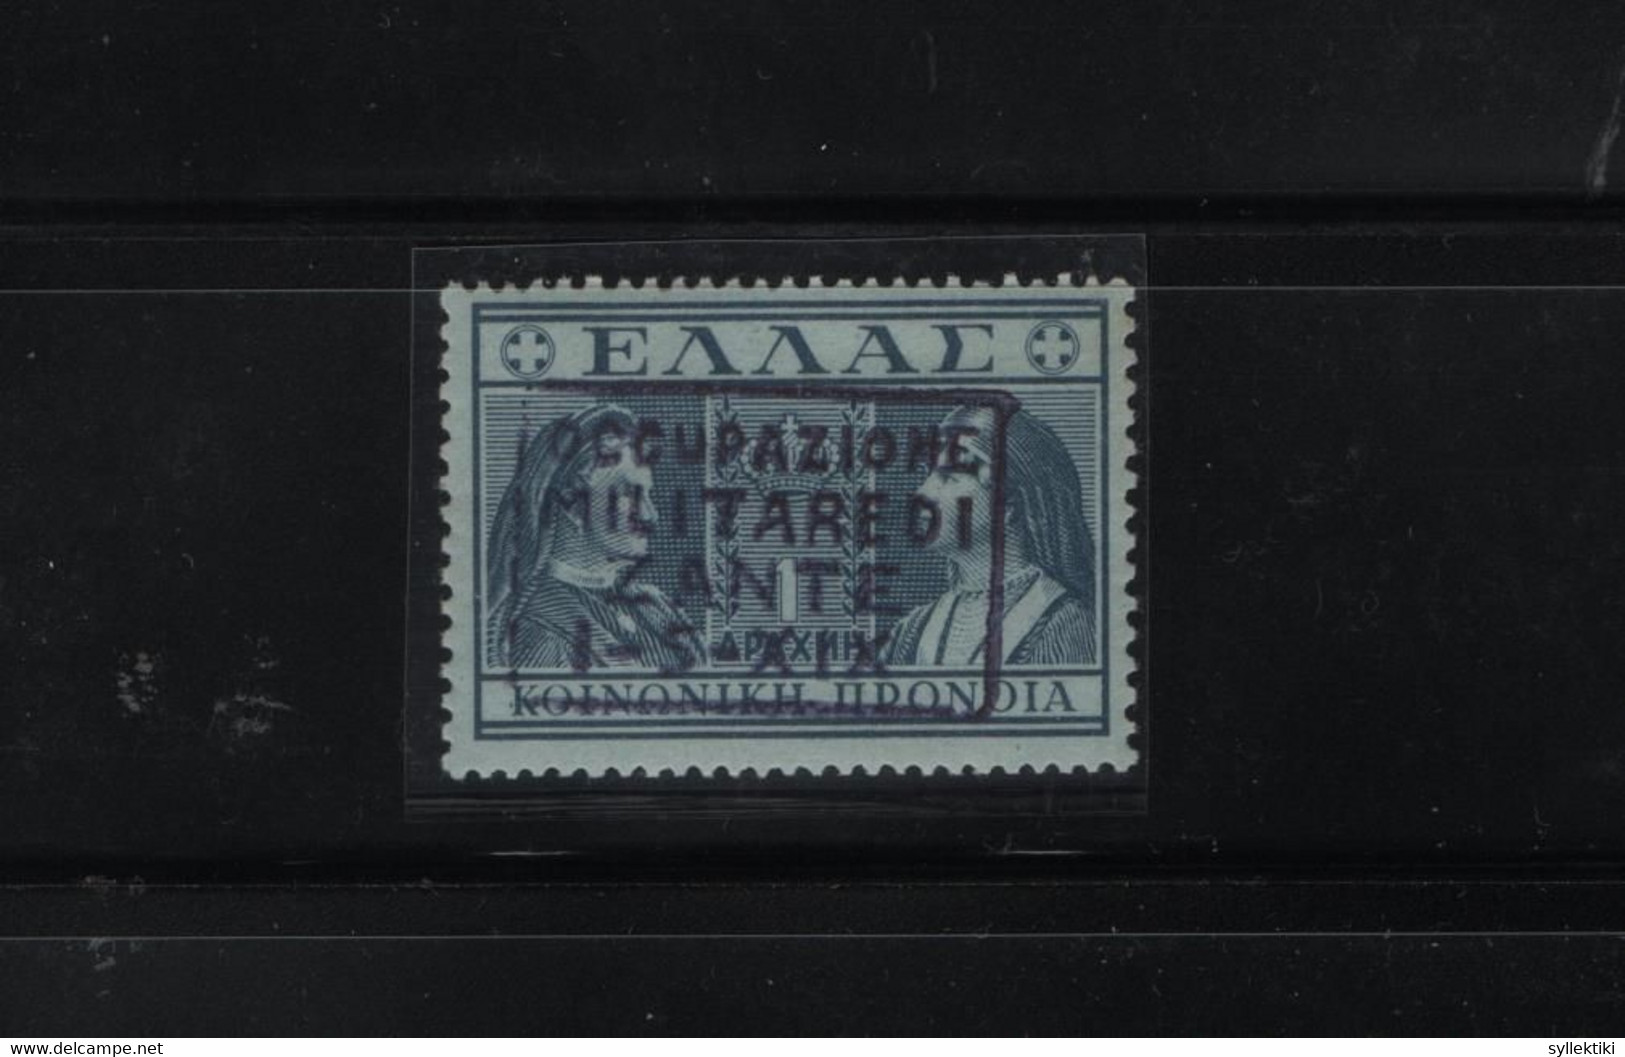 GREECE 1941 ZANTE OVERPRINT ON CHARITY ISSUE 1 DRACHMA MNH STAMP     HELLAS No 306 AND VALUE  EURO 900.00++ - Iles Ioniques